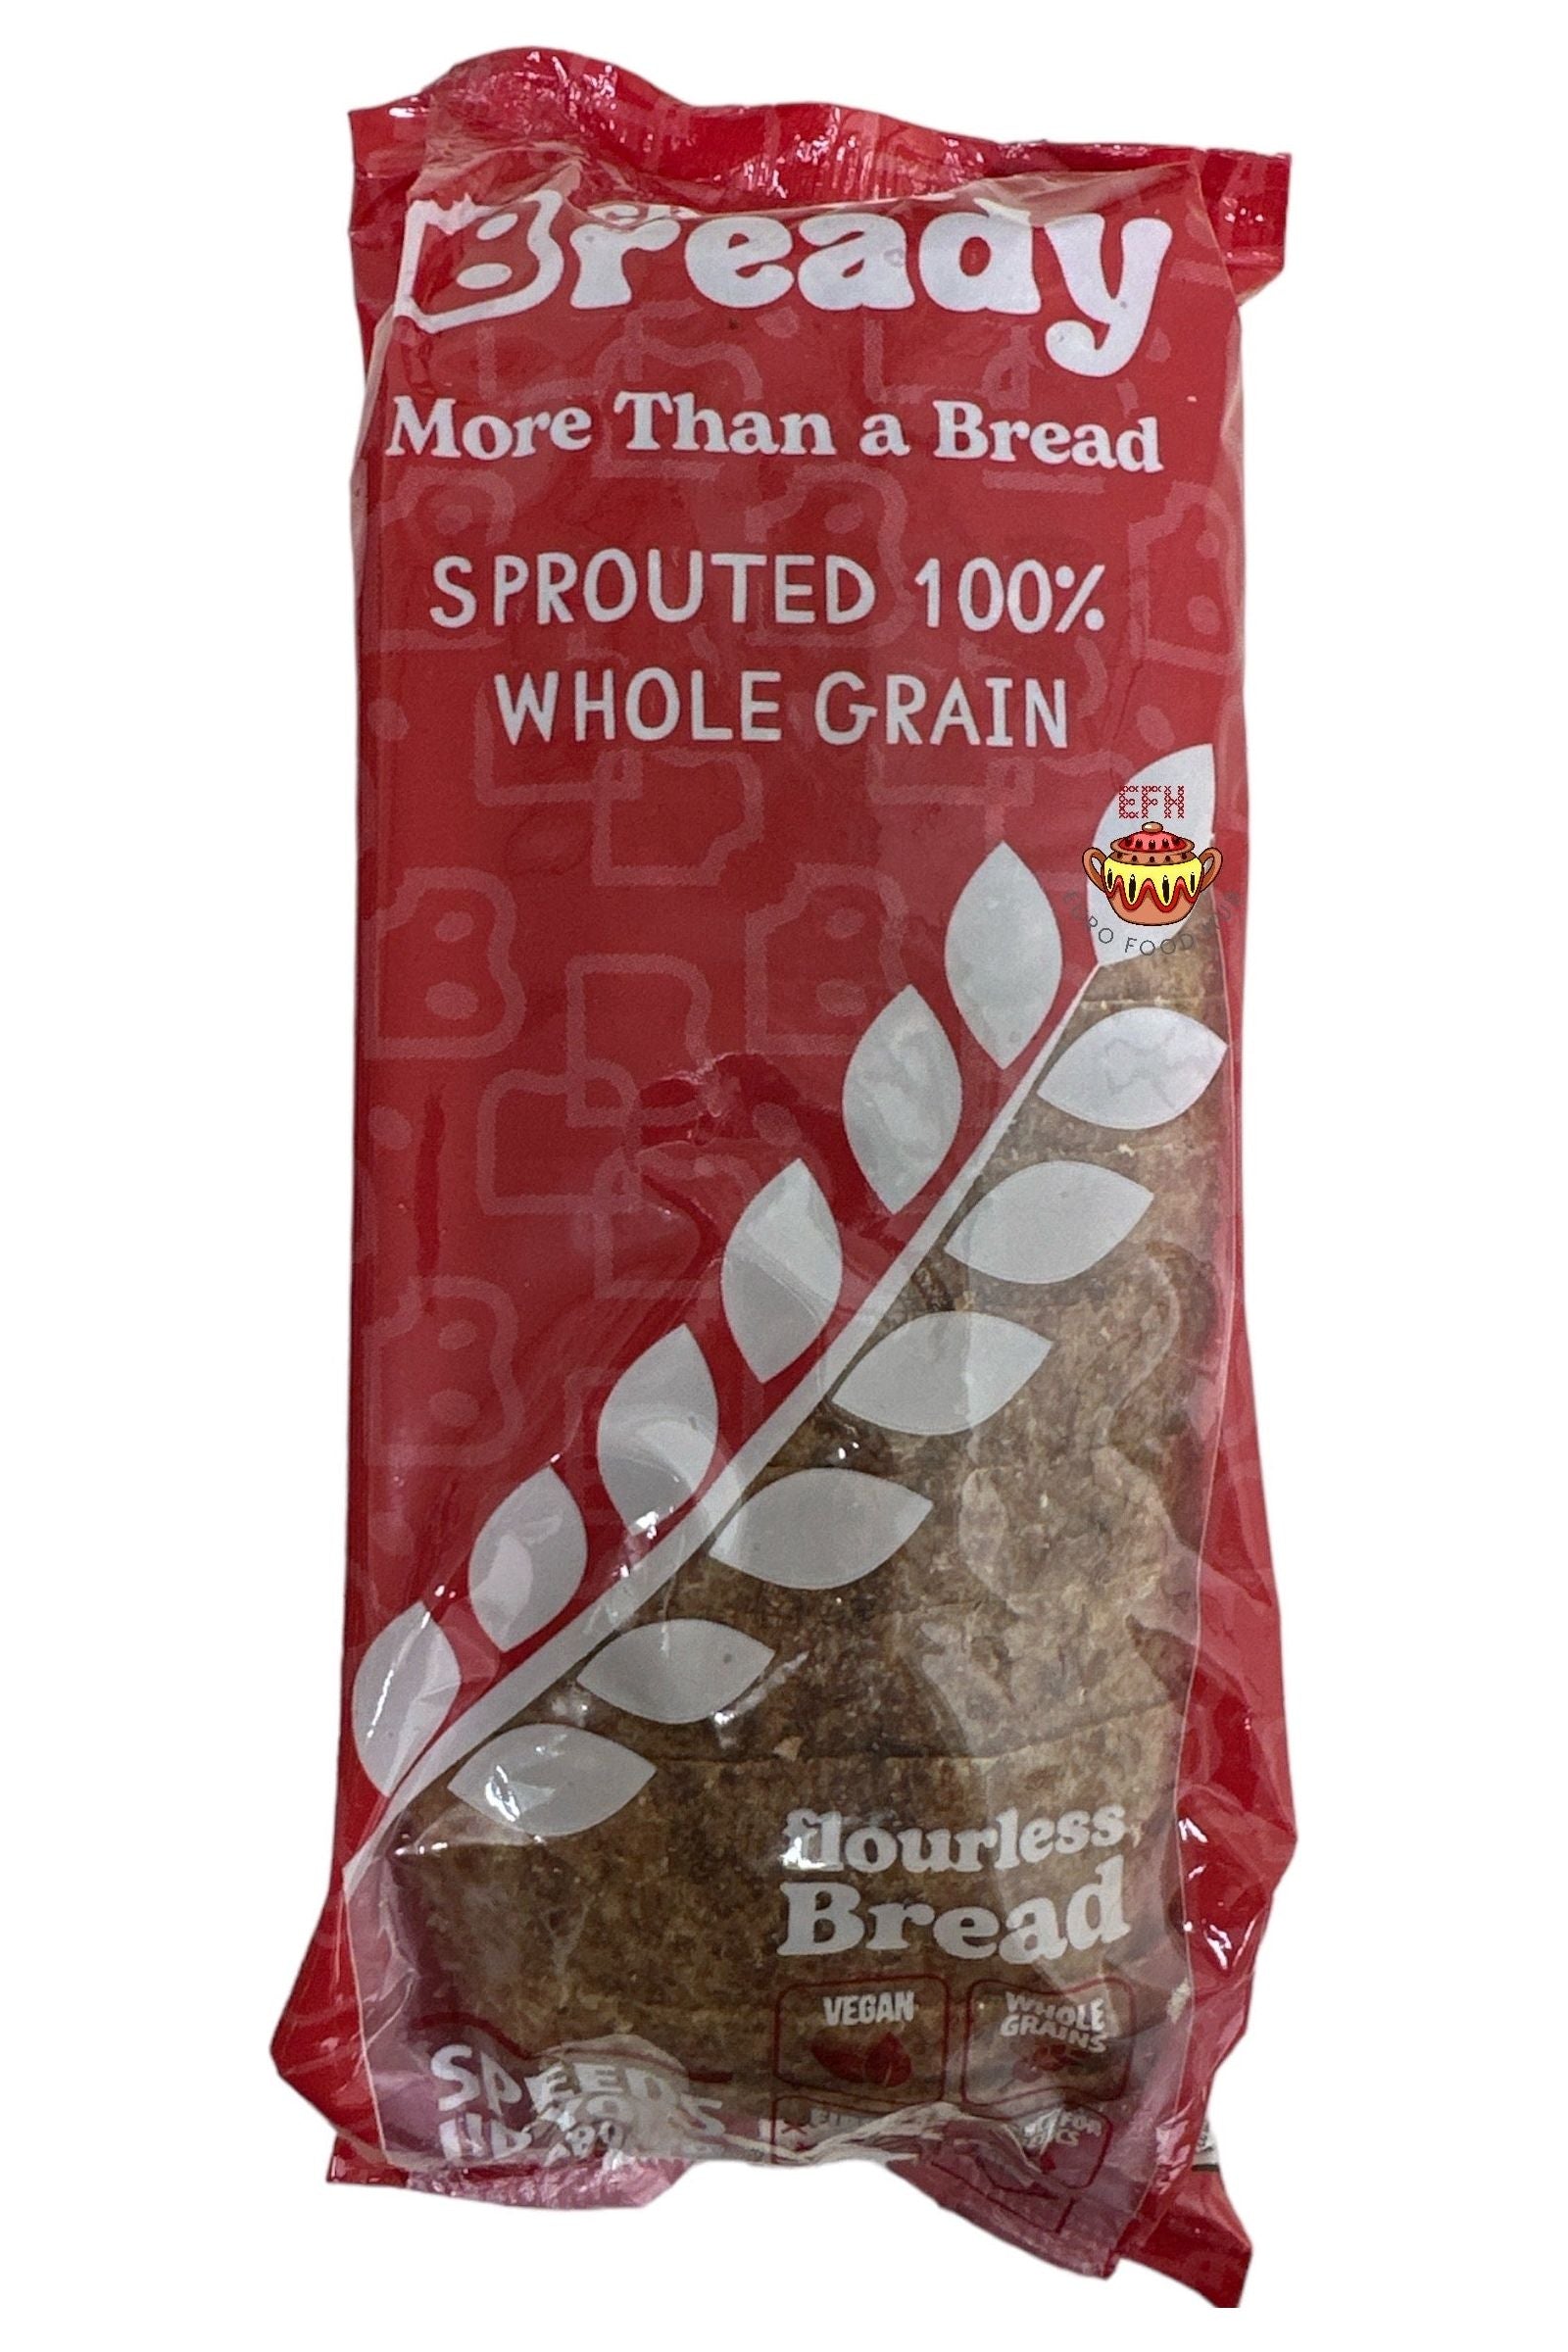 B Ready - Sprouted 100% Whole Grain Bread - Flourless